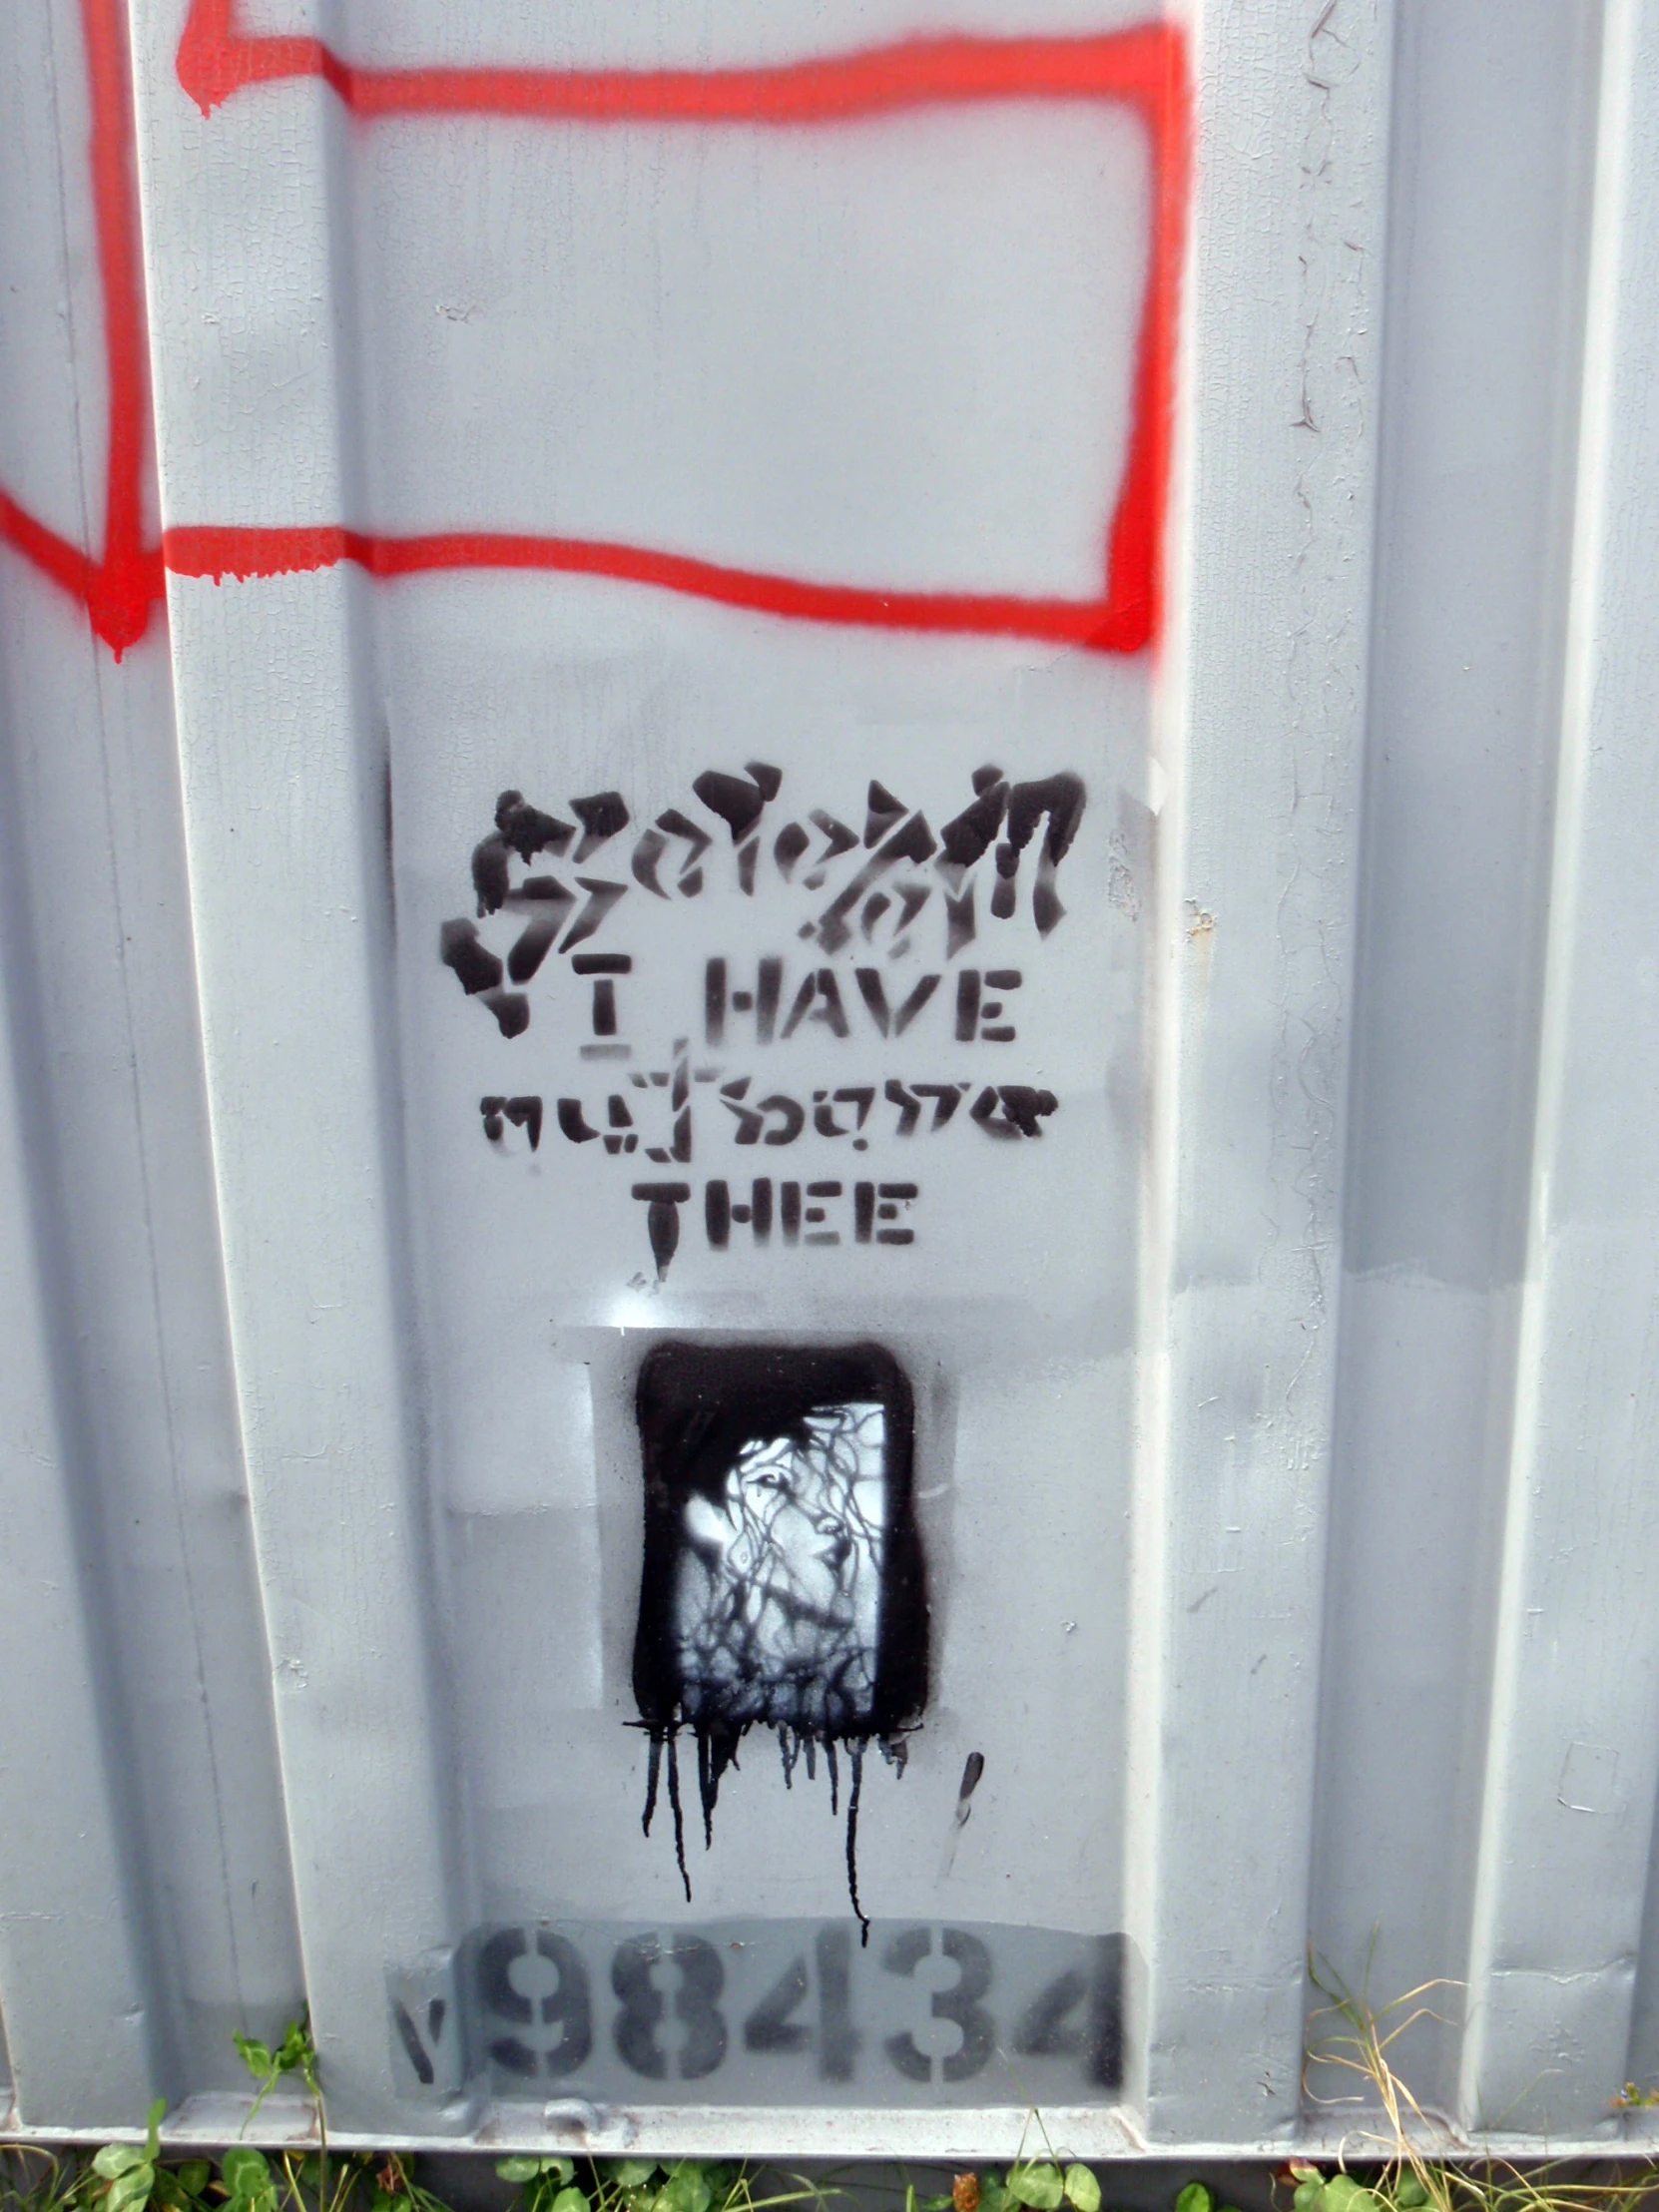 some graffiti on a white box with the door open